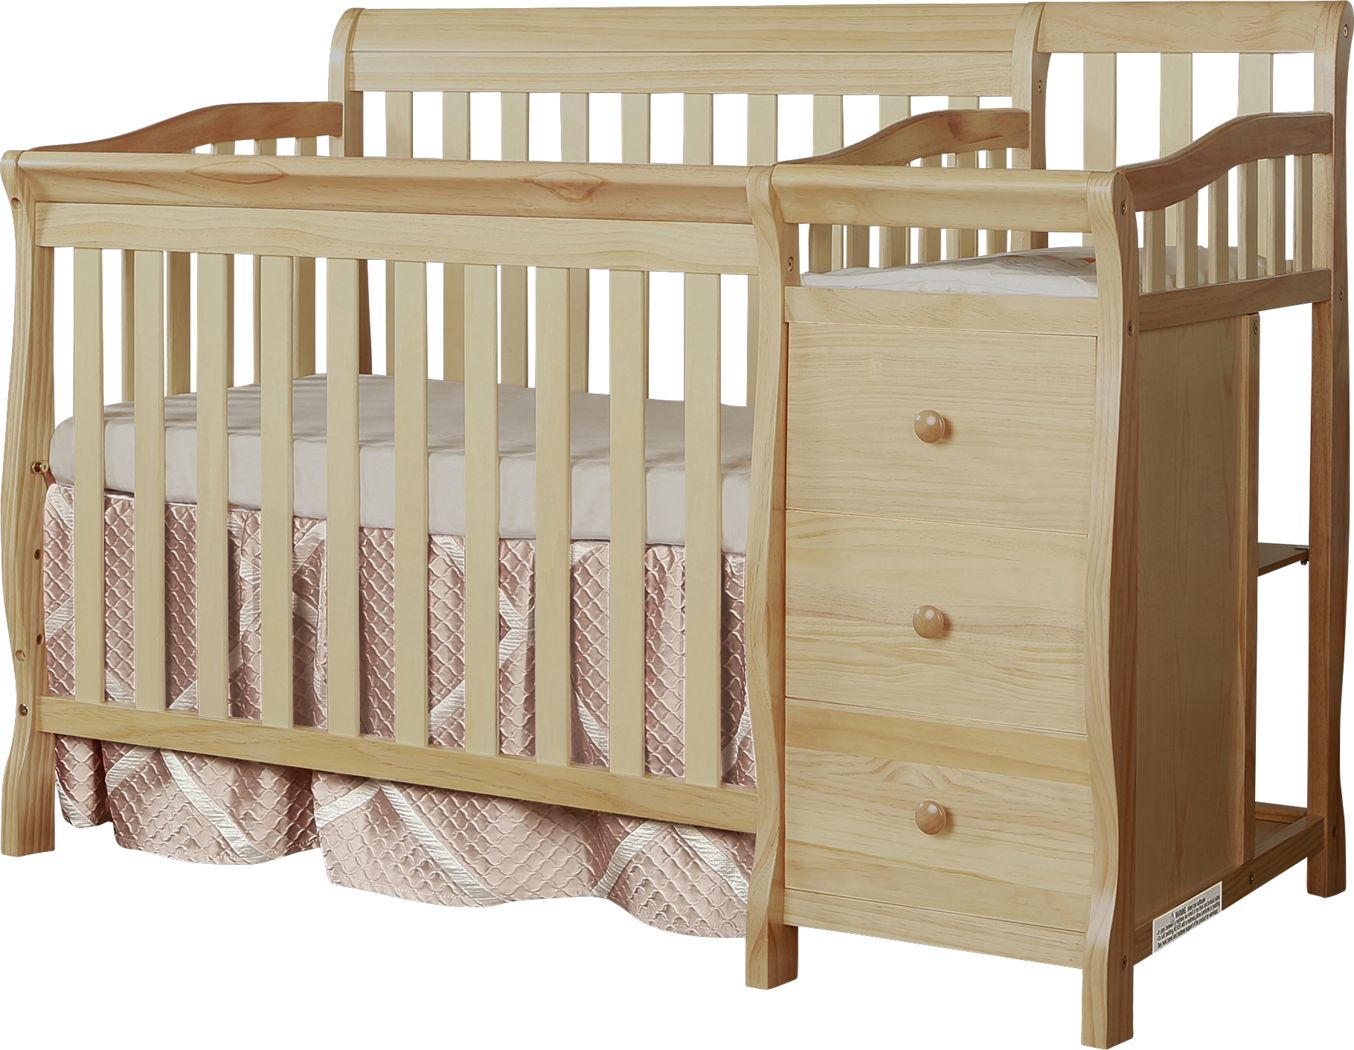 cribs for sale near me